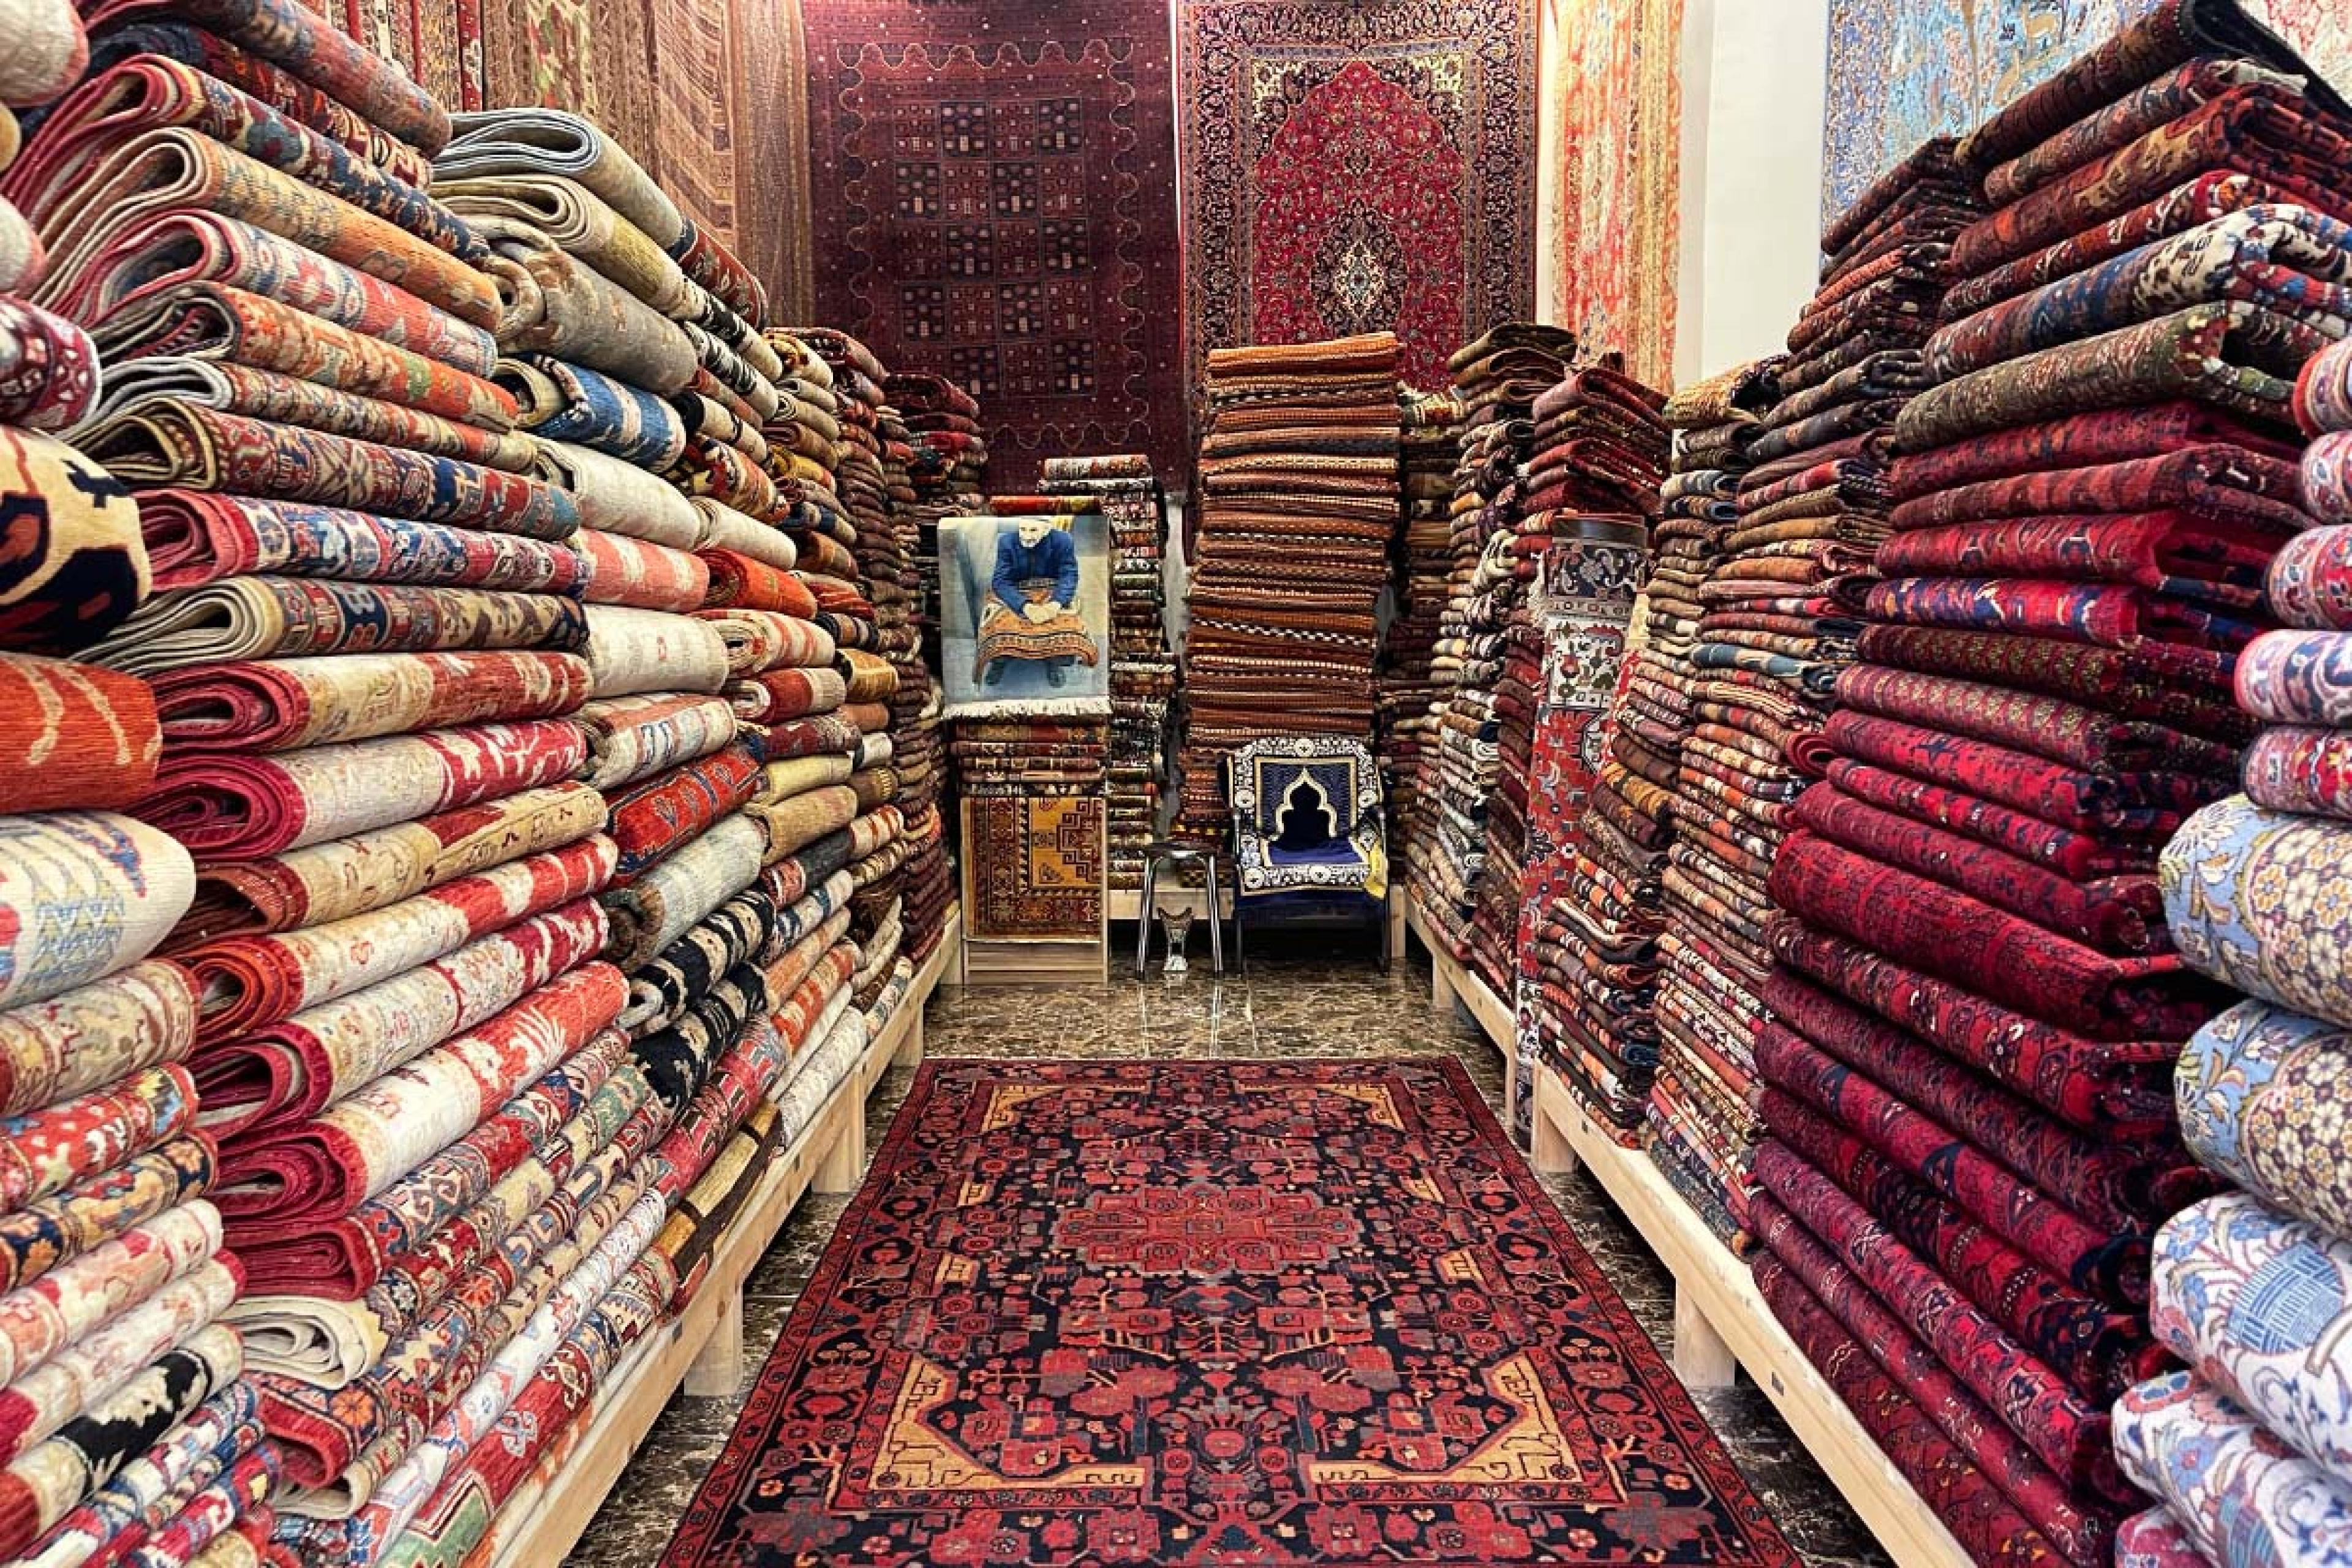 piles of patterned rugs